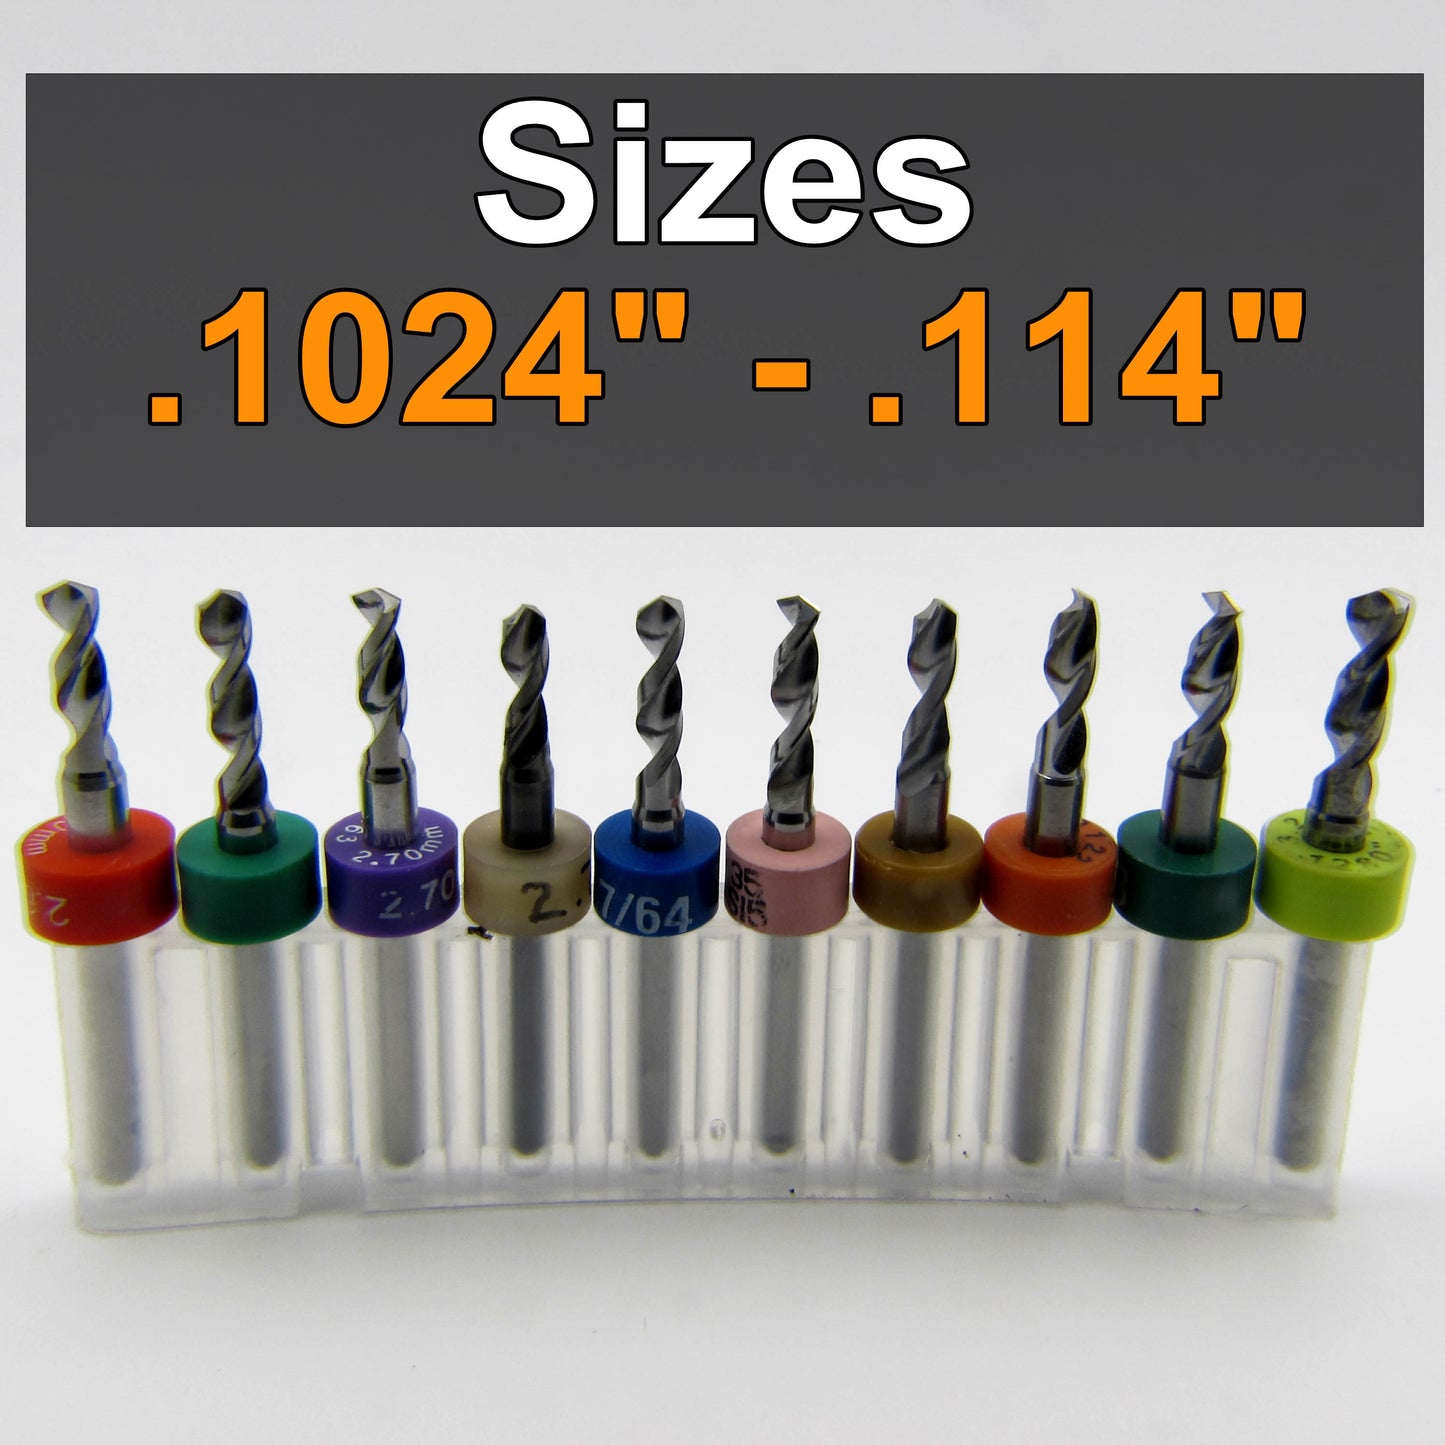 Incremental Size Solid Carbide Drill Set - Ten Pieces .1024" - .114" ID08This Incremental Size Solid Carbide Drill Set includes  .102 2.6mm .104 #37 2.65 .1065 #36 2.7 .108 2.75mm 7/64 .1094 .11 #35 2.8mm .111 #34 .112 2.85mm .113 #33 .114 2.9